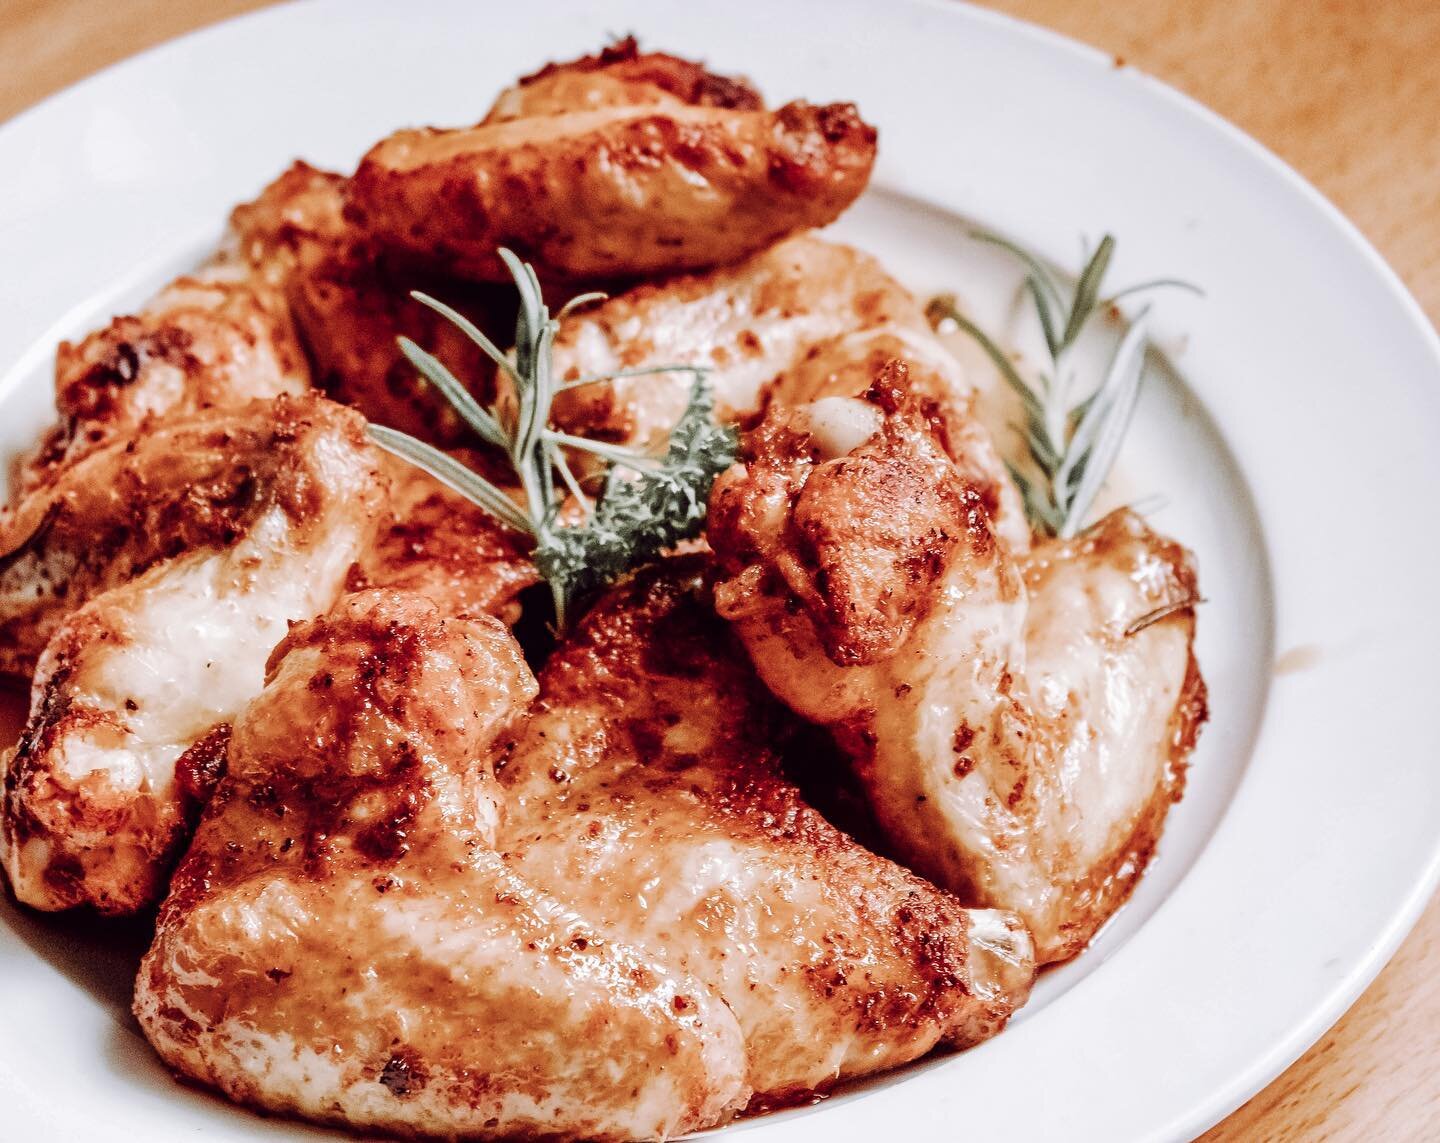 Rosemary chicken recipe up on the blog later today!

#food #foodporn #foodie #instafood #foodphotography #foodstagram #yummy #instagood #love #recipe #foodblogger #recipe #like #delicious #homemade #healthyfood #photooftheday #picoftheday #dinner #fo